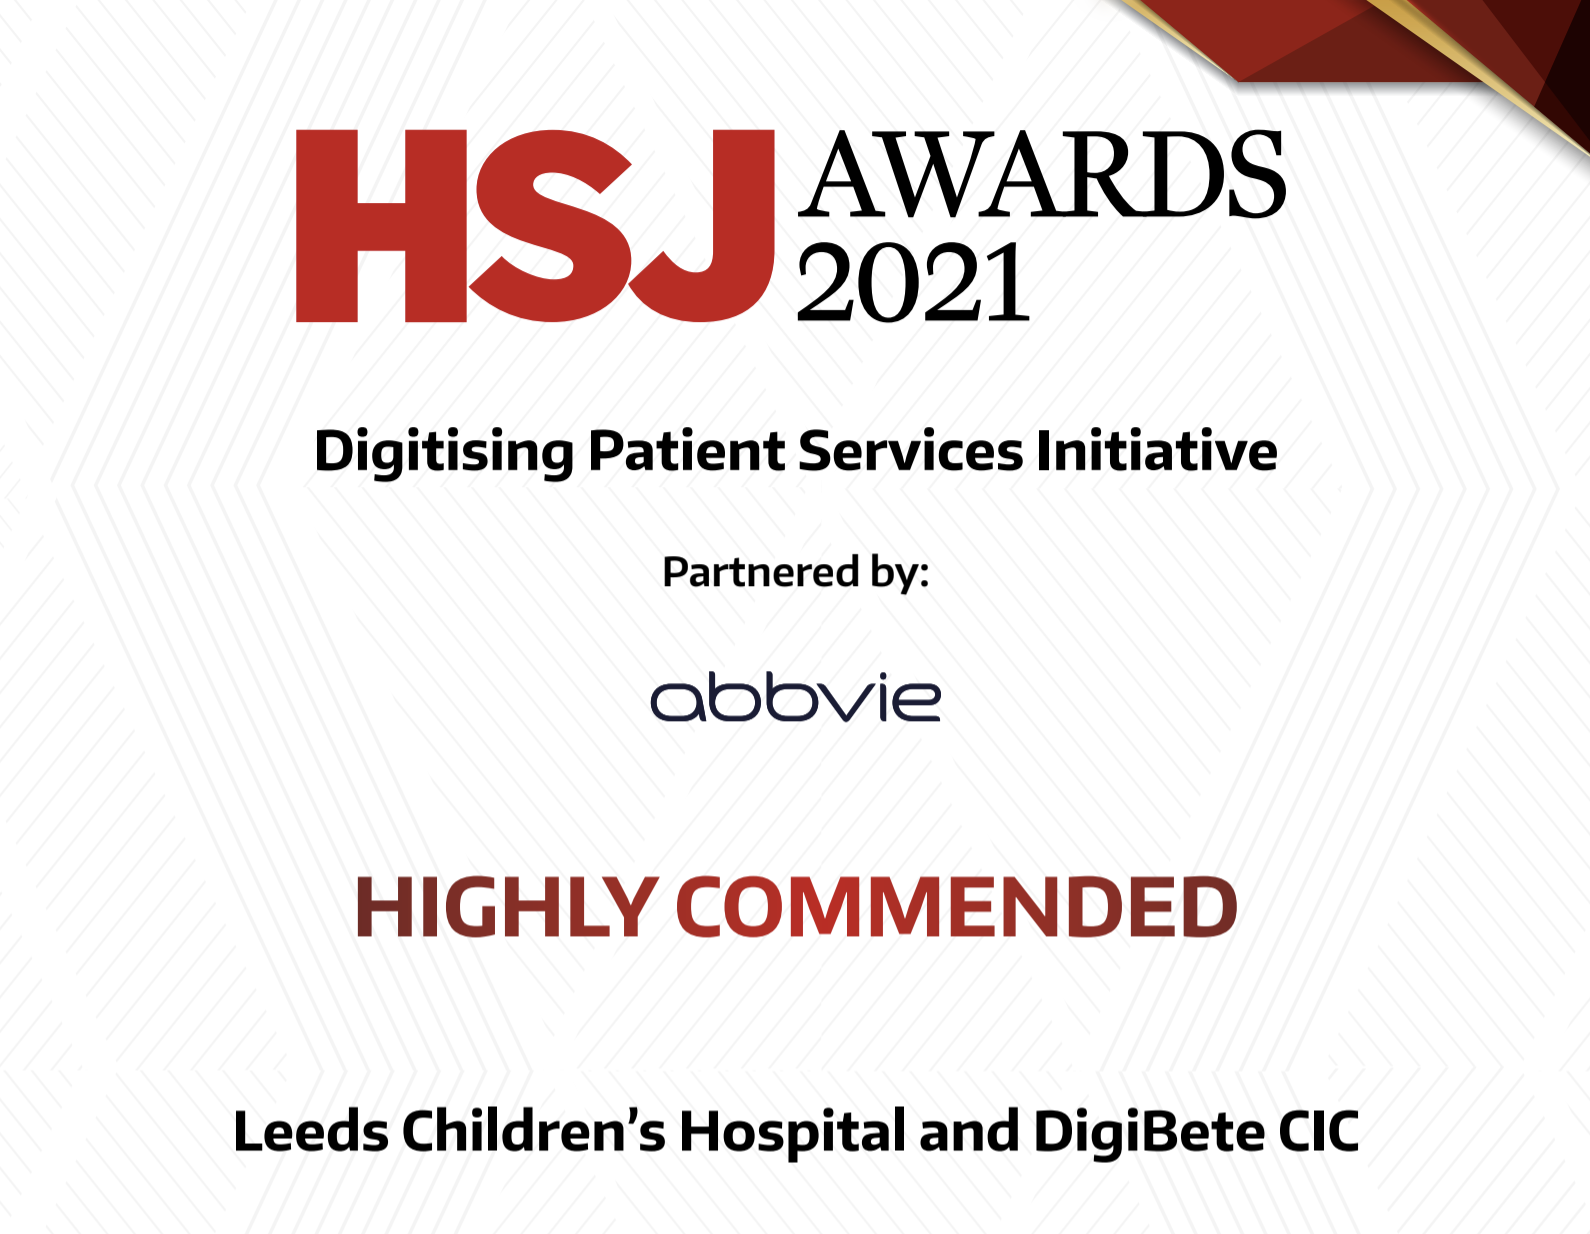 DigiBete App - Highly Commended at the HSJ Awards!